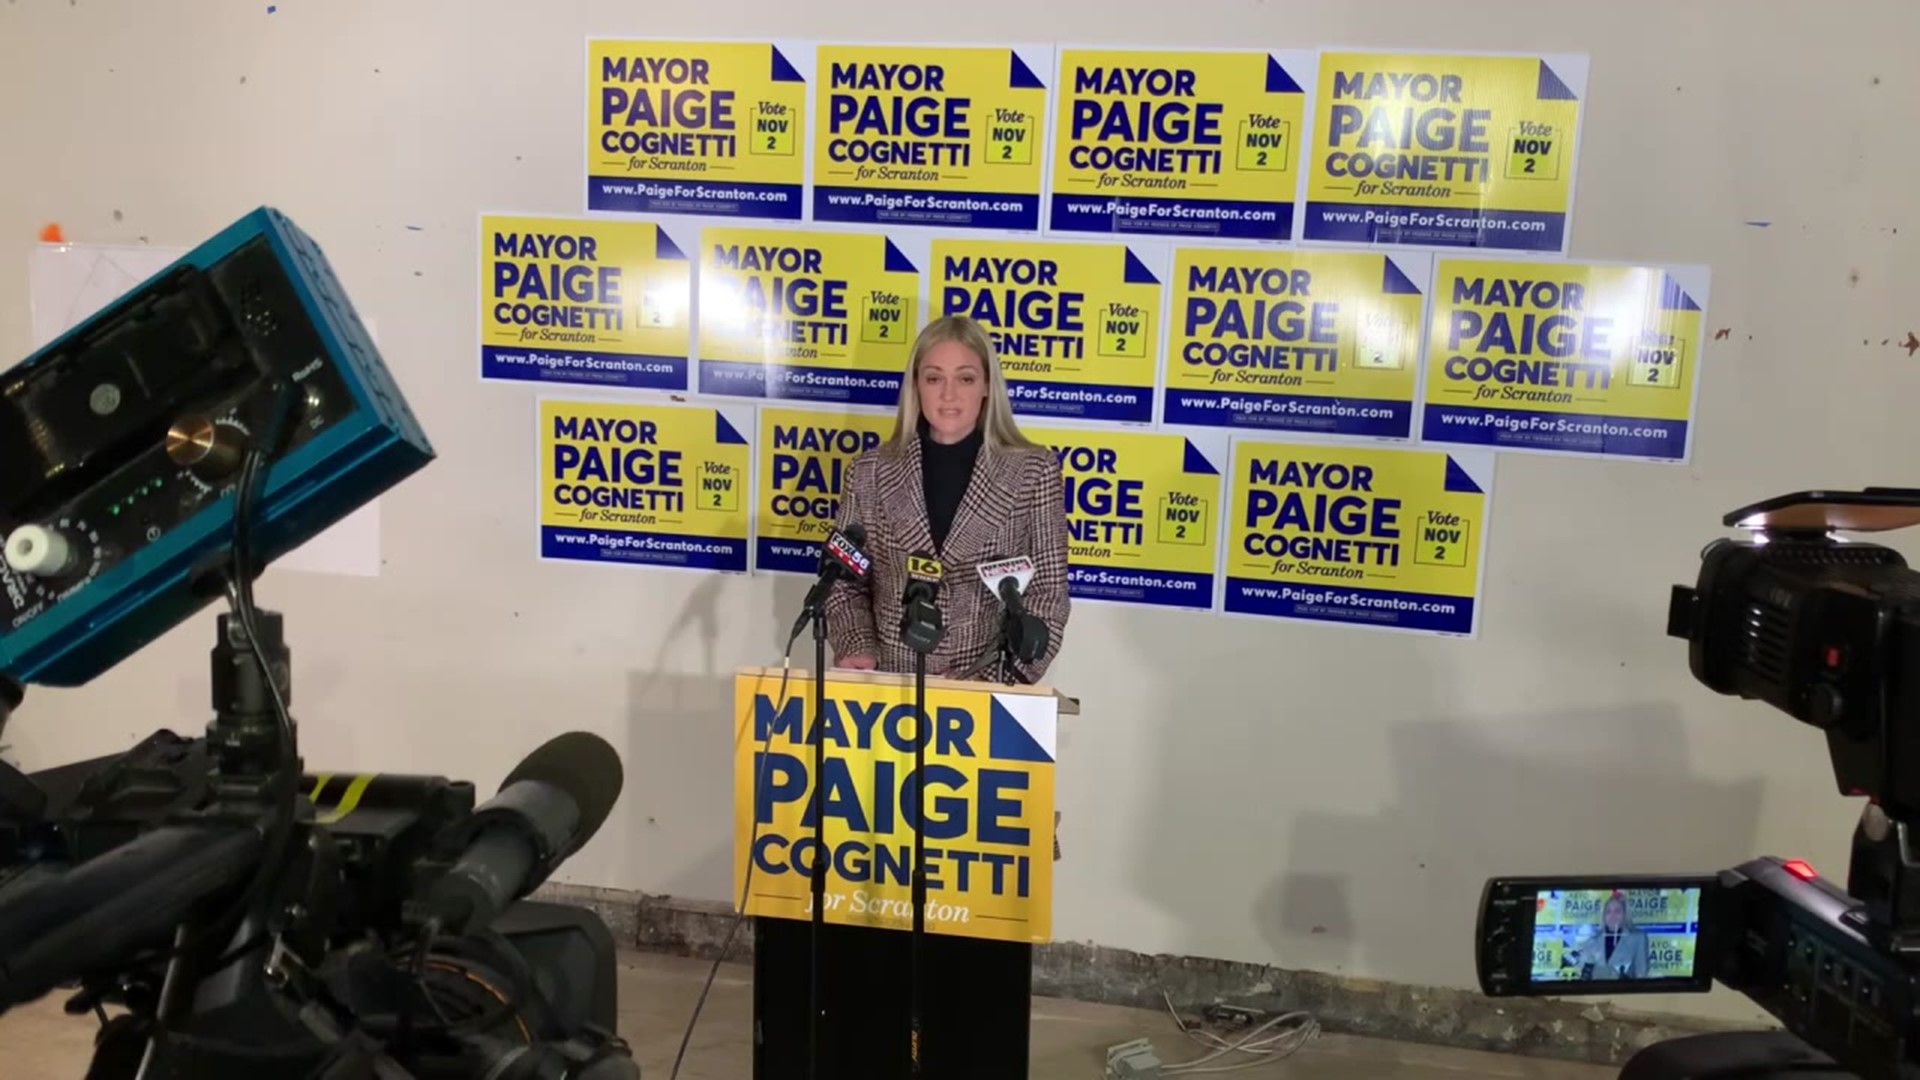 Paige Cognetti is the incumbent mayor. Darwin Shaw was the only Republican on the ballot in the spring.